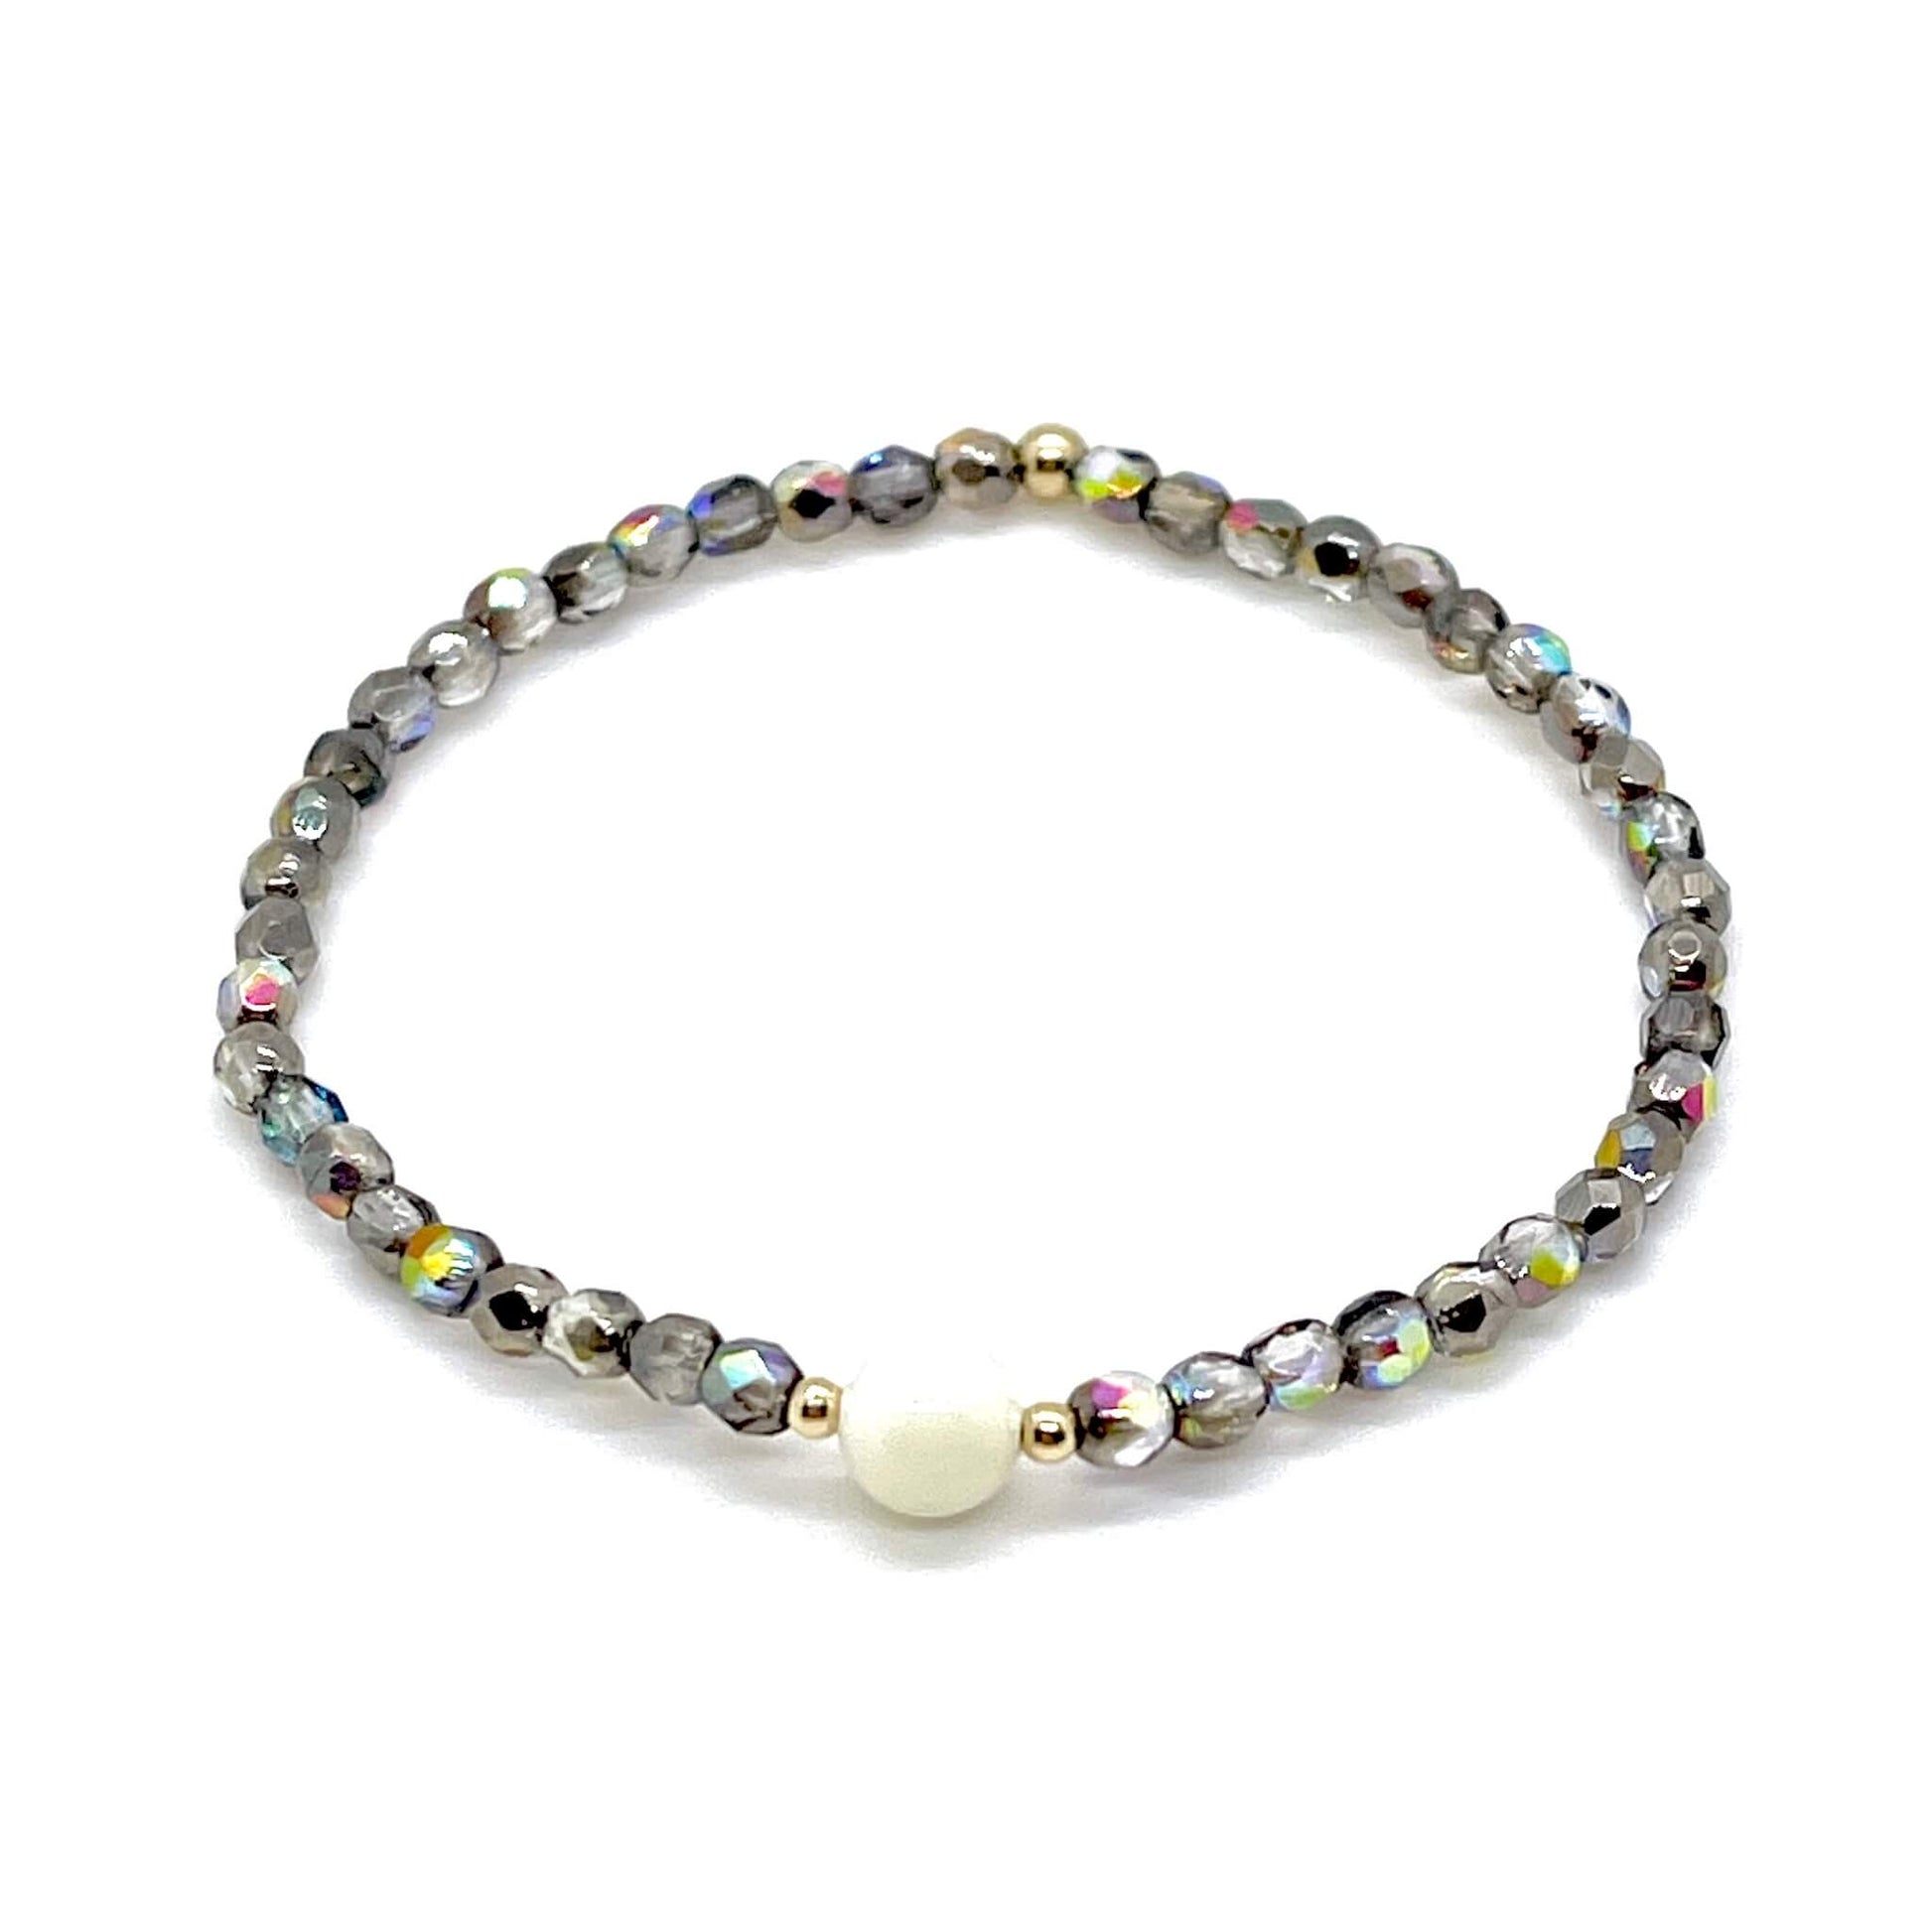 Grey-silver crystal bracelet with mother-of-pearl center bead and small gold accent beads.